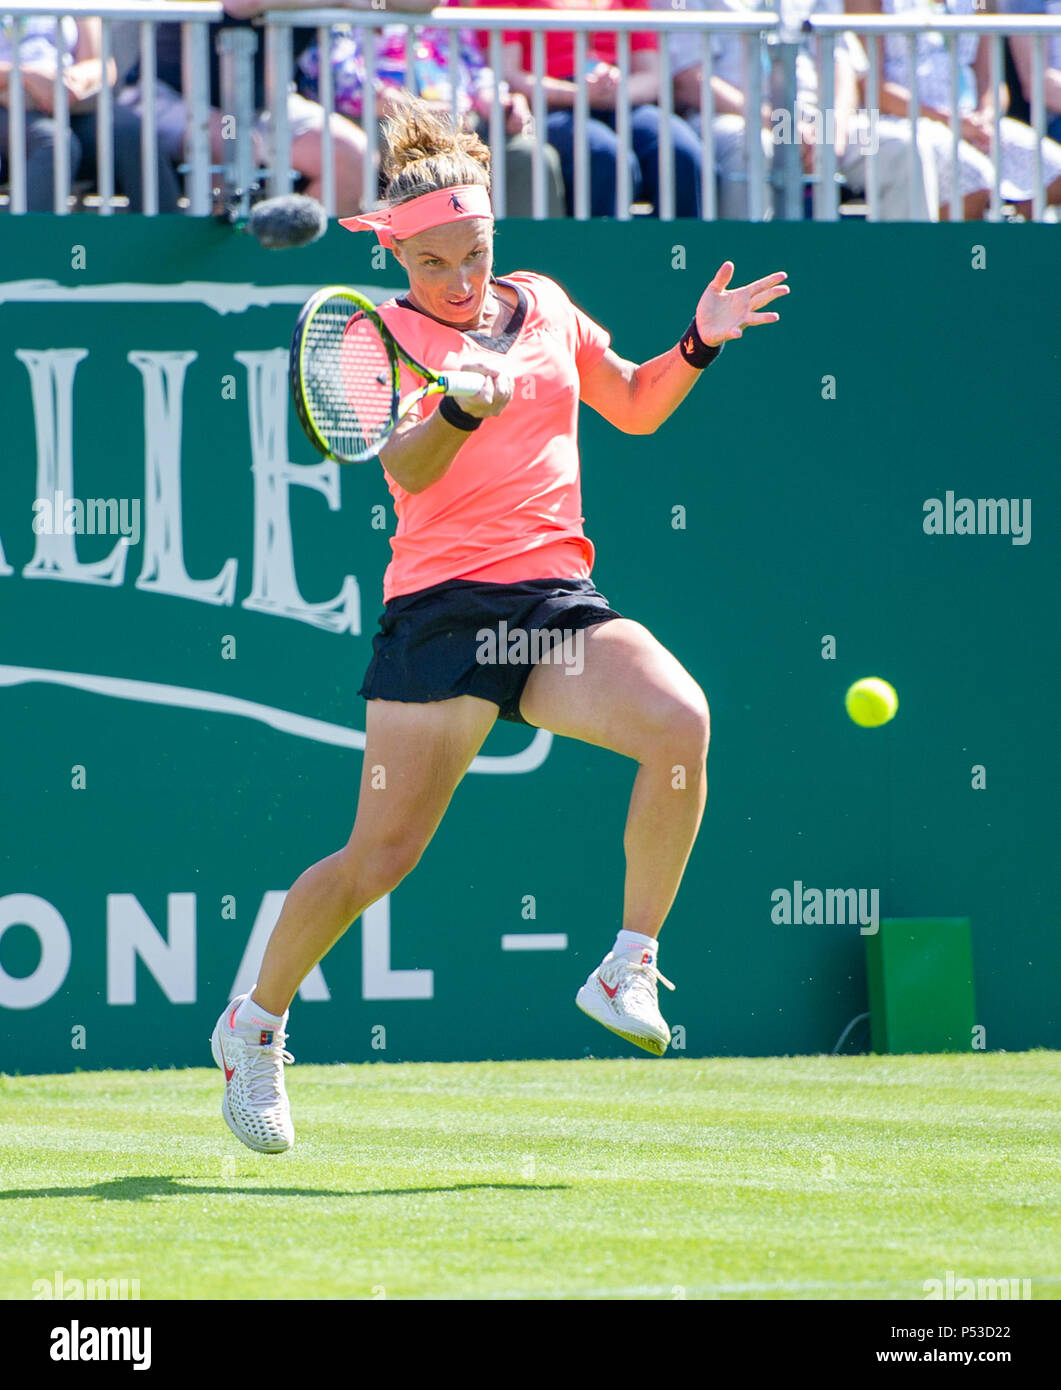 Svetlana Kuznetsova of Russia plays a shot against Maria Sakkari of Greece during the Nature Valley International tennis tournament at Devonshire Park in Eastbourne East Sussex UK. 24 June 2018 Stock Photo